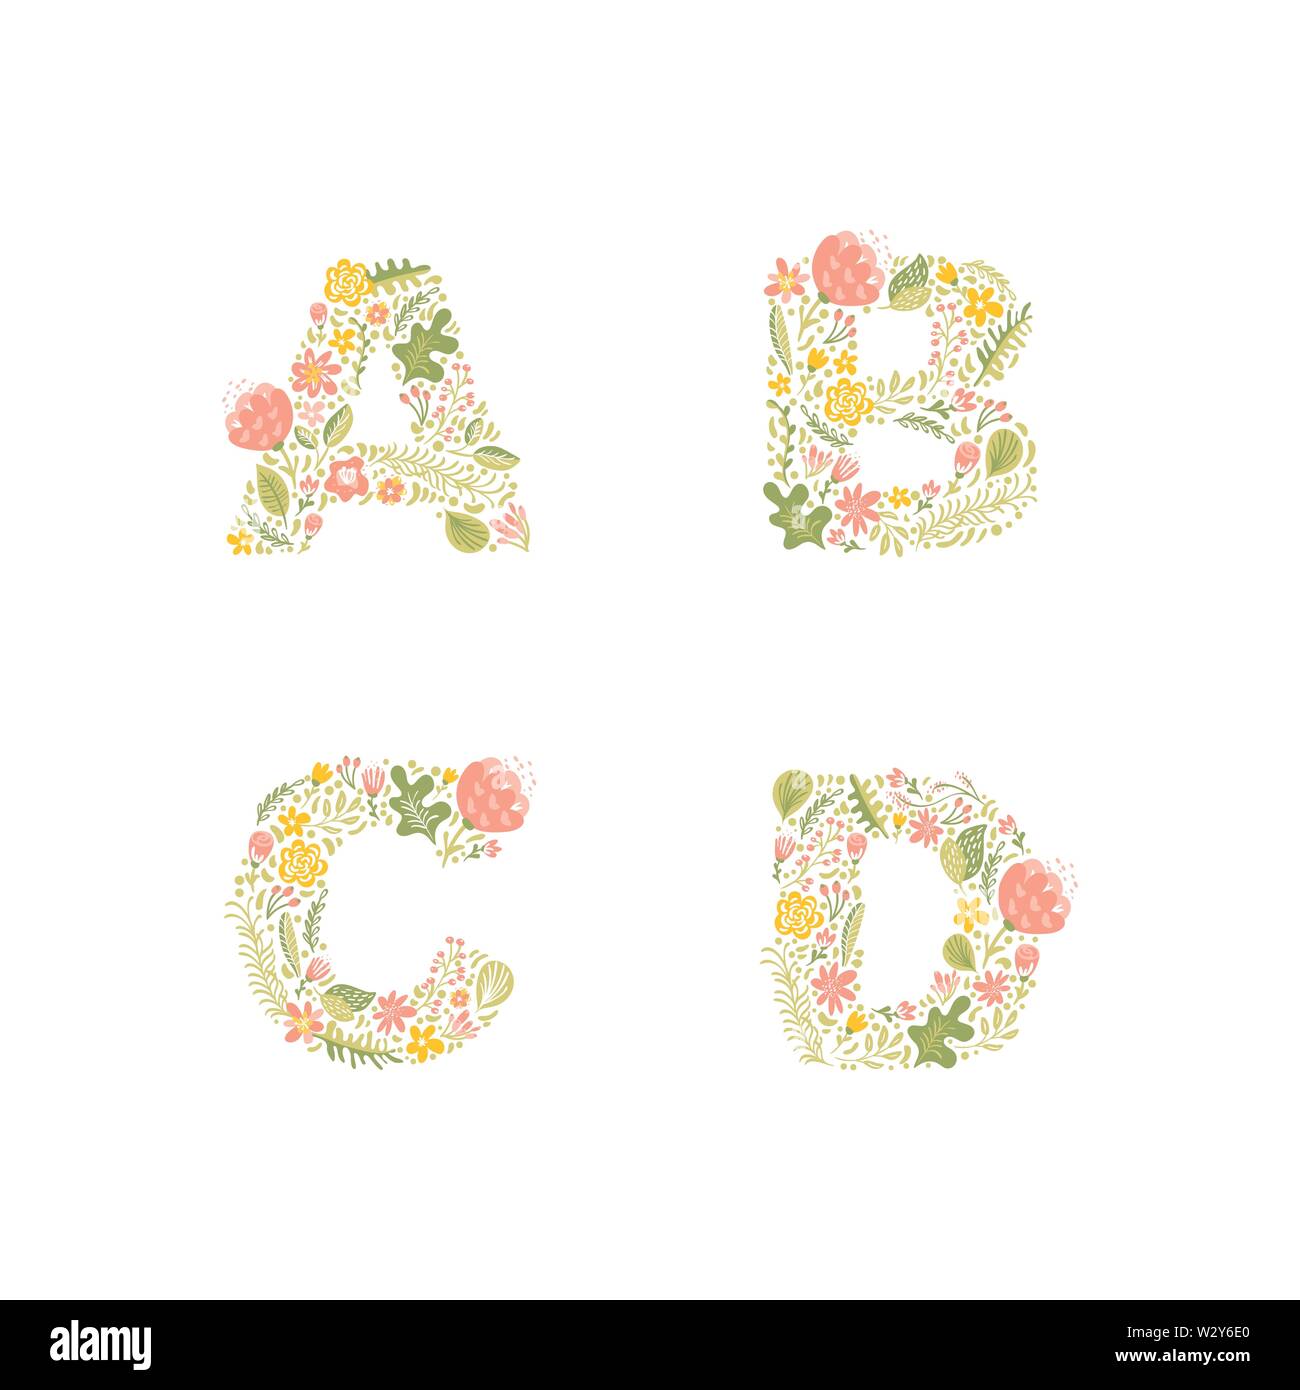 Vector Hand Drawn floral uppercase letter monograms or logo. Uppercase Letters A, B, C, D with Flowers and Branches Blossom. Floral Design Stock Vector